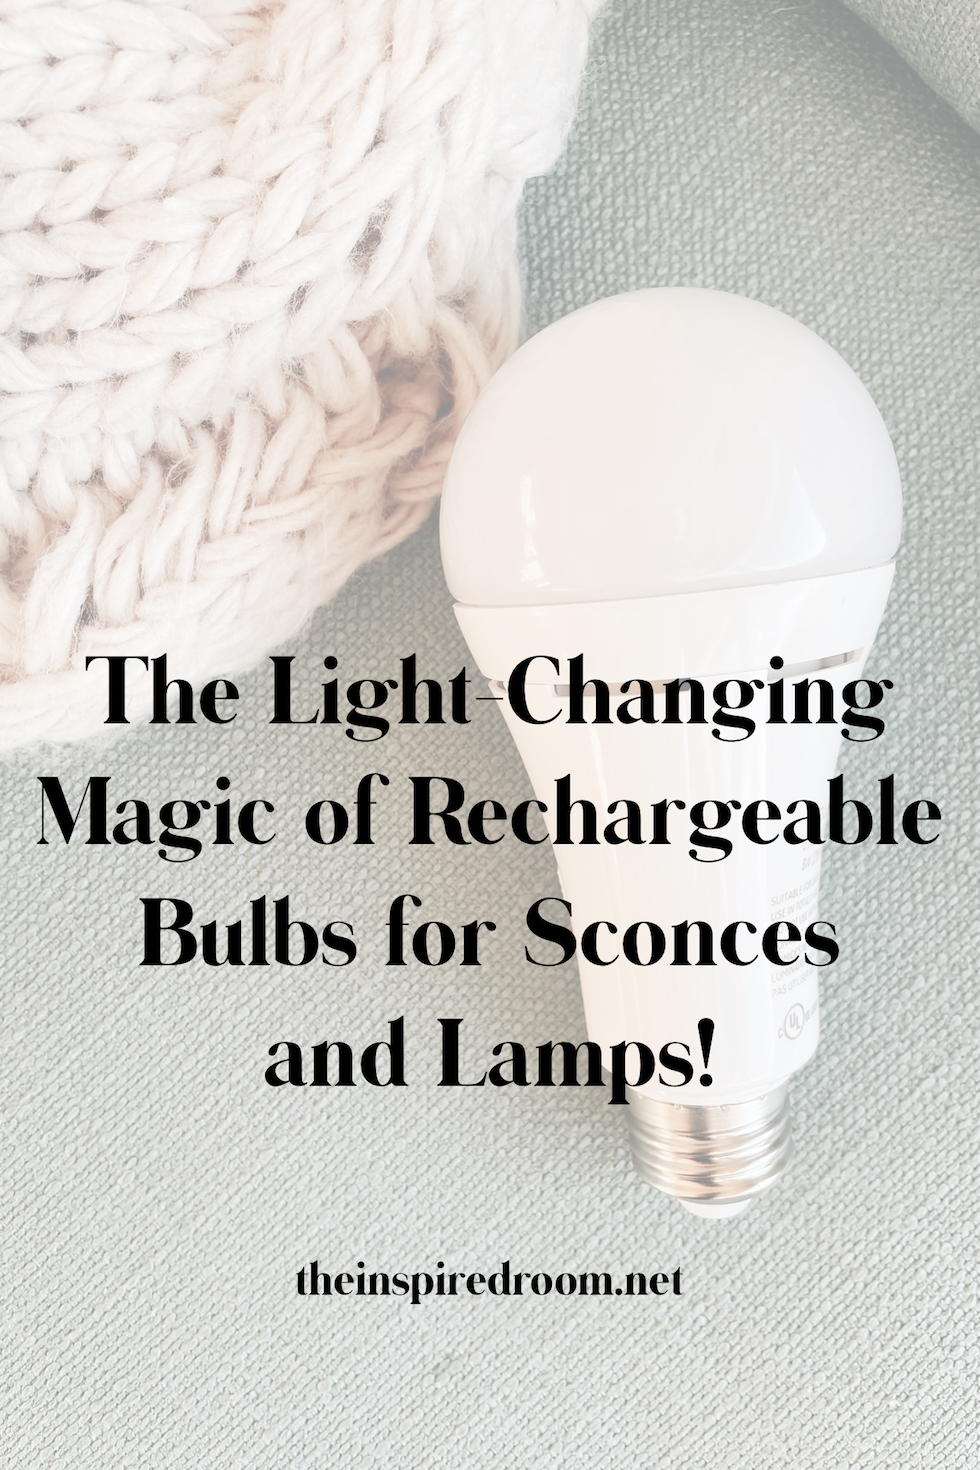 The Light-Changing Magic of Rechargeable Bulbs for Sconces + Lamps!